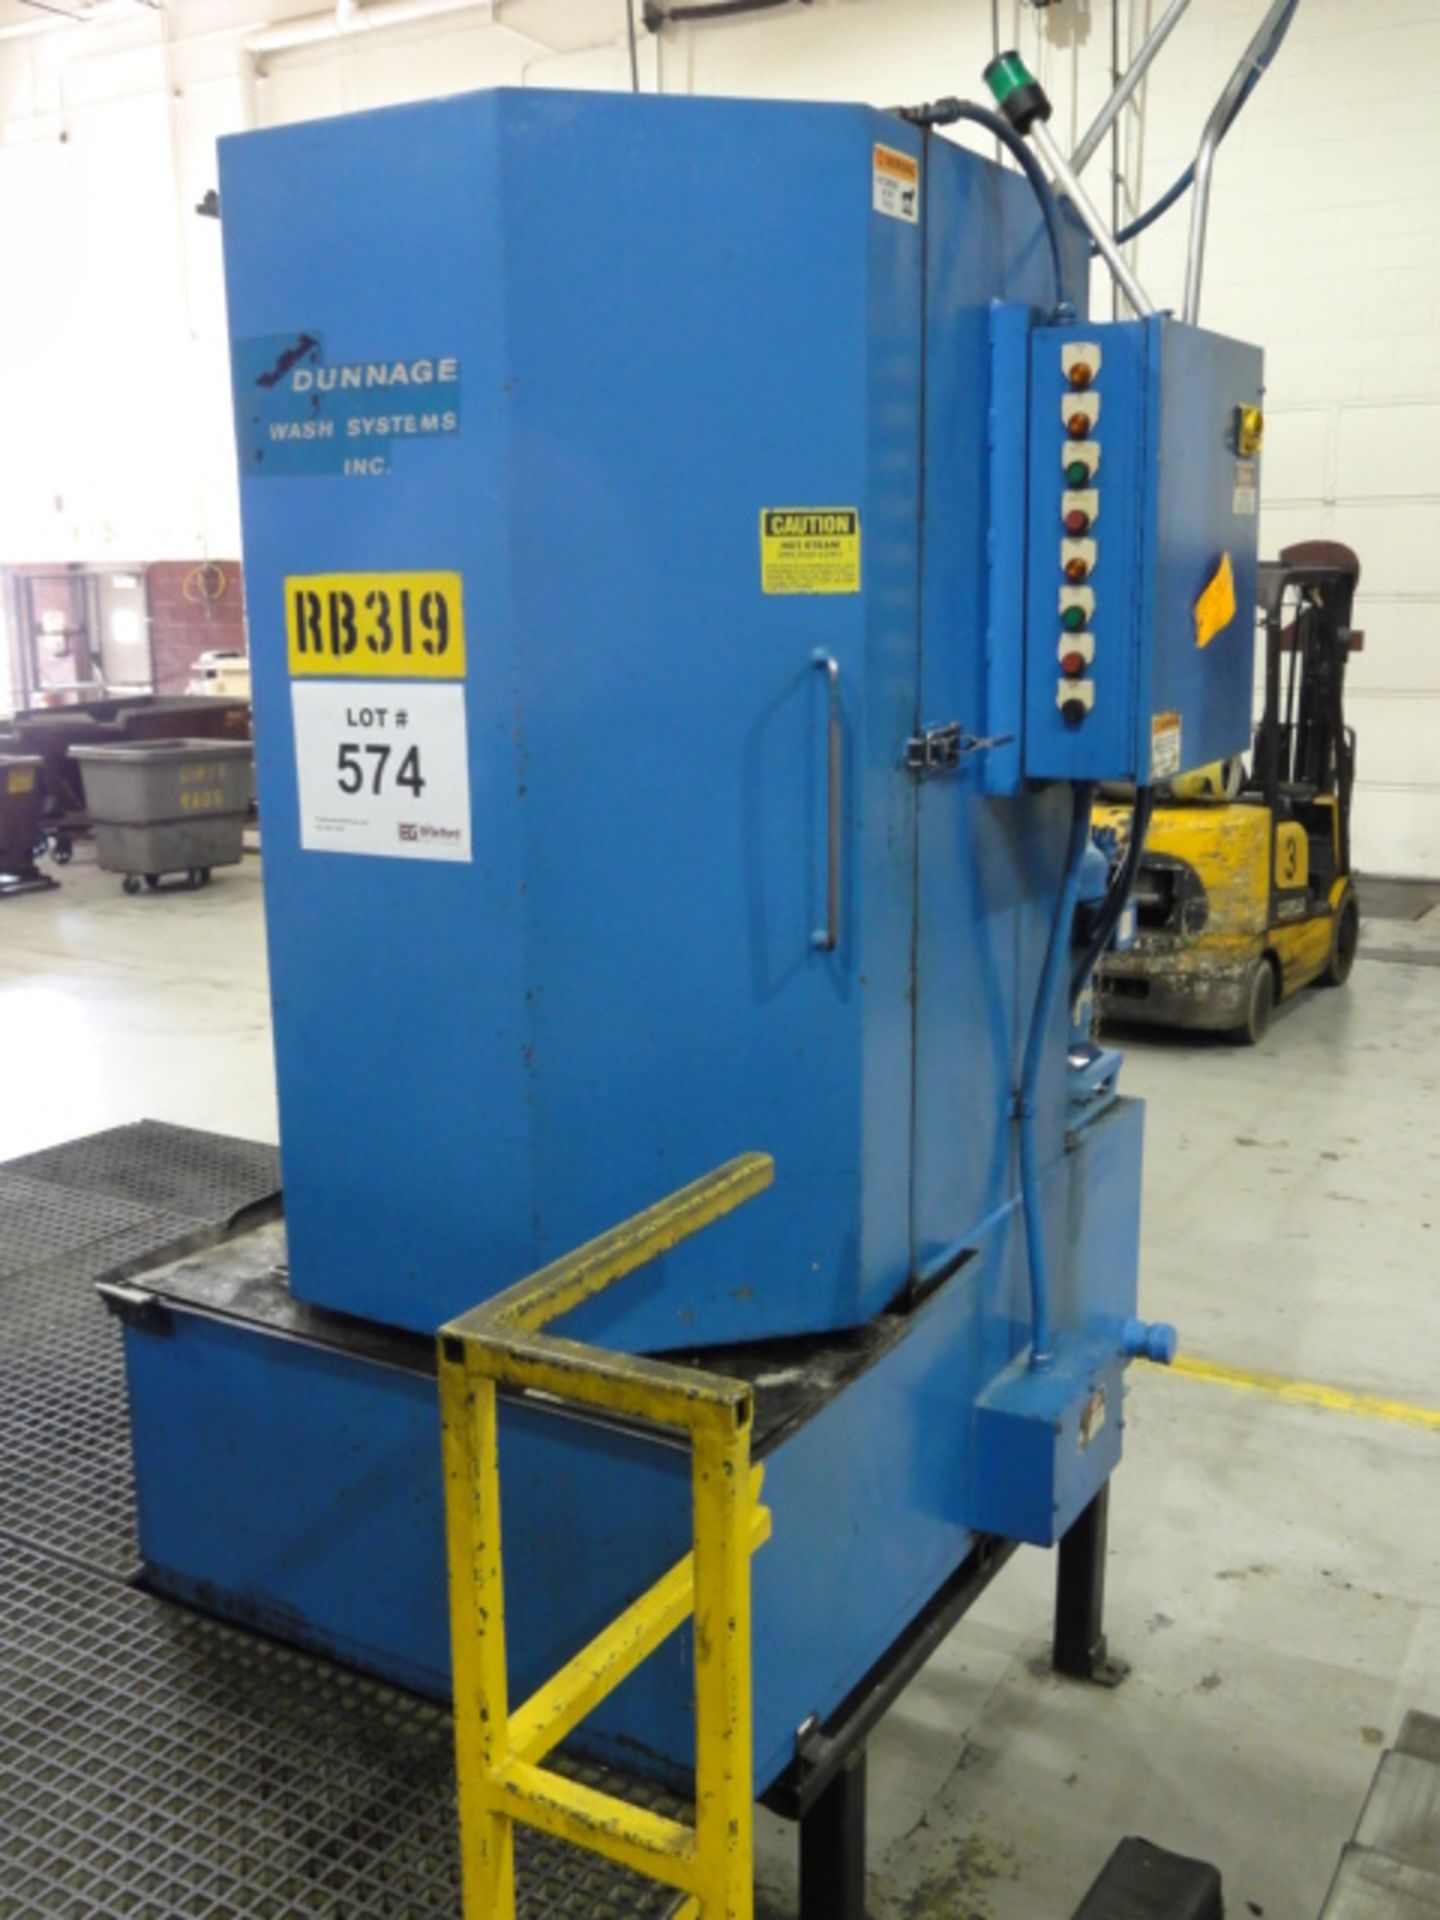 Dunnage Model FL-3648-EDB Single Door Industrial Carousel Washer w/ Heater and Drying Sytems,